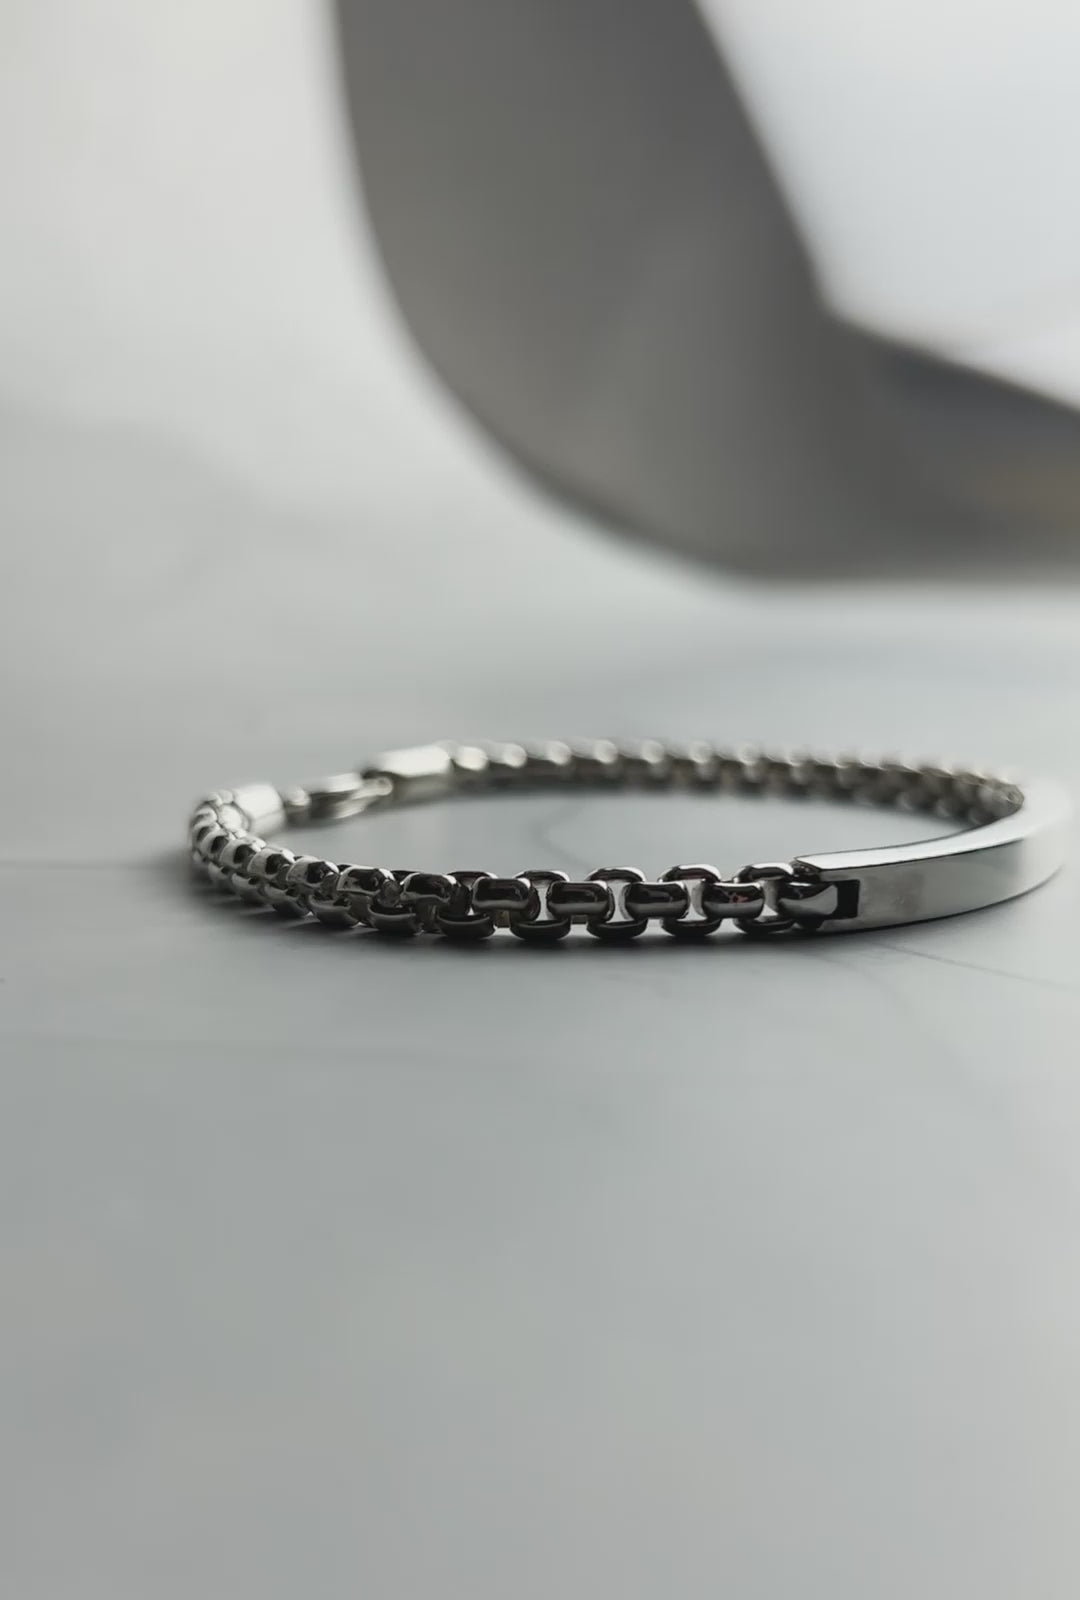 Why Silver Bracelets Are the Hottest Trend in Men's Fashion Right Now |  Silveradda